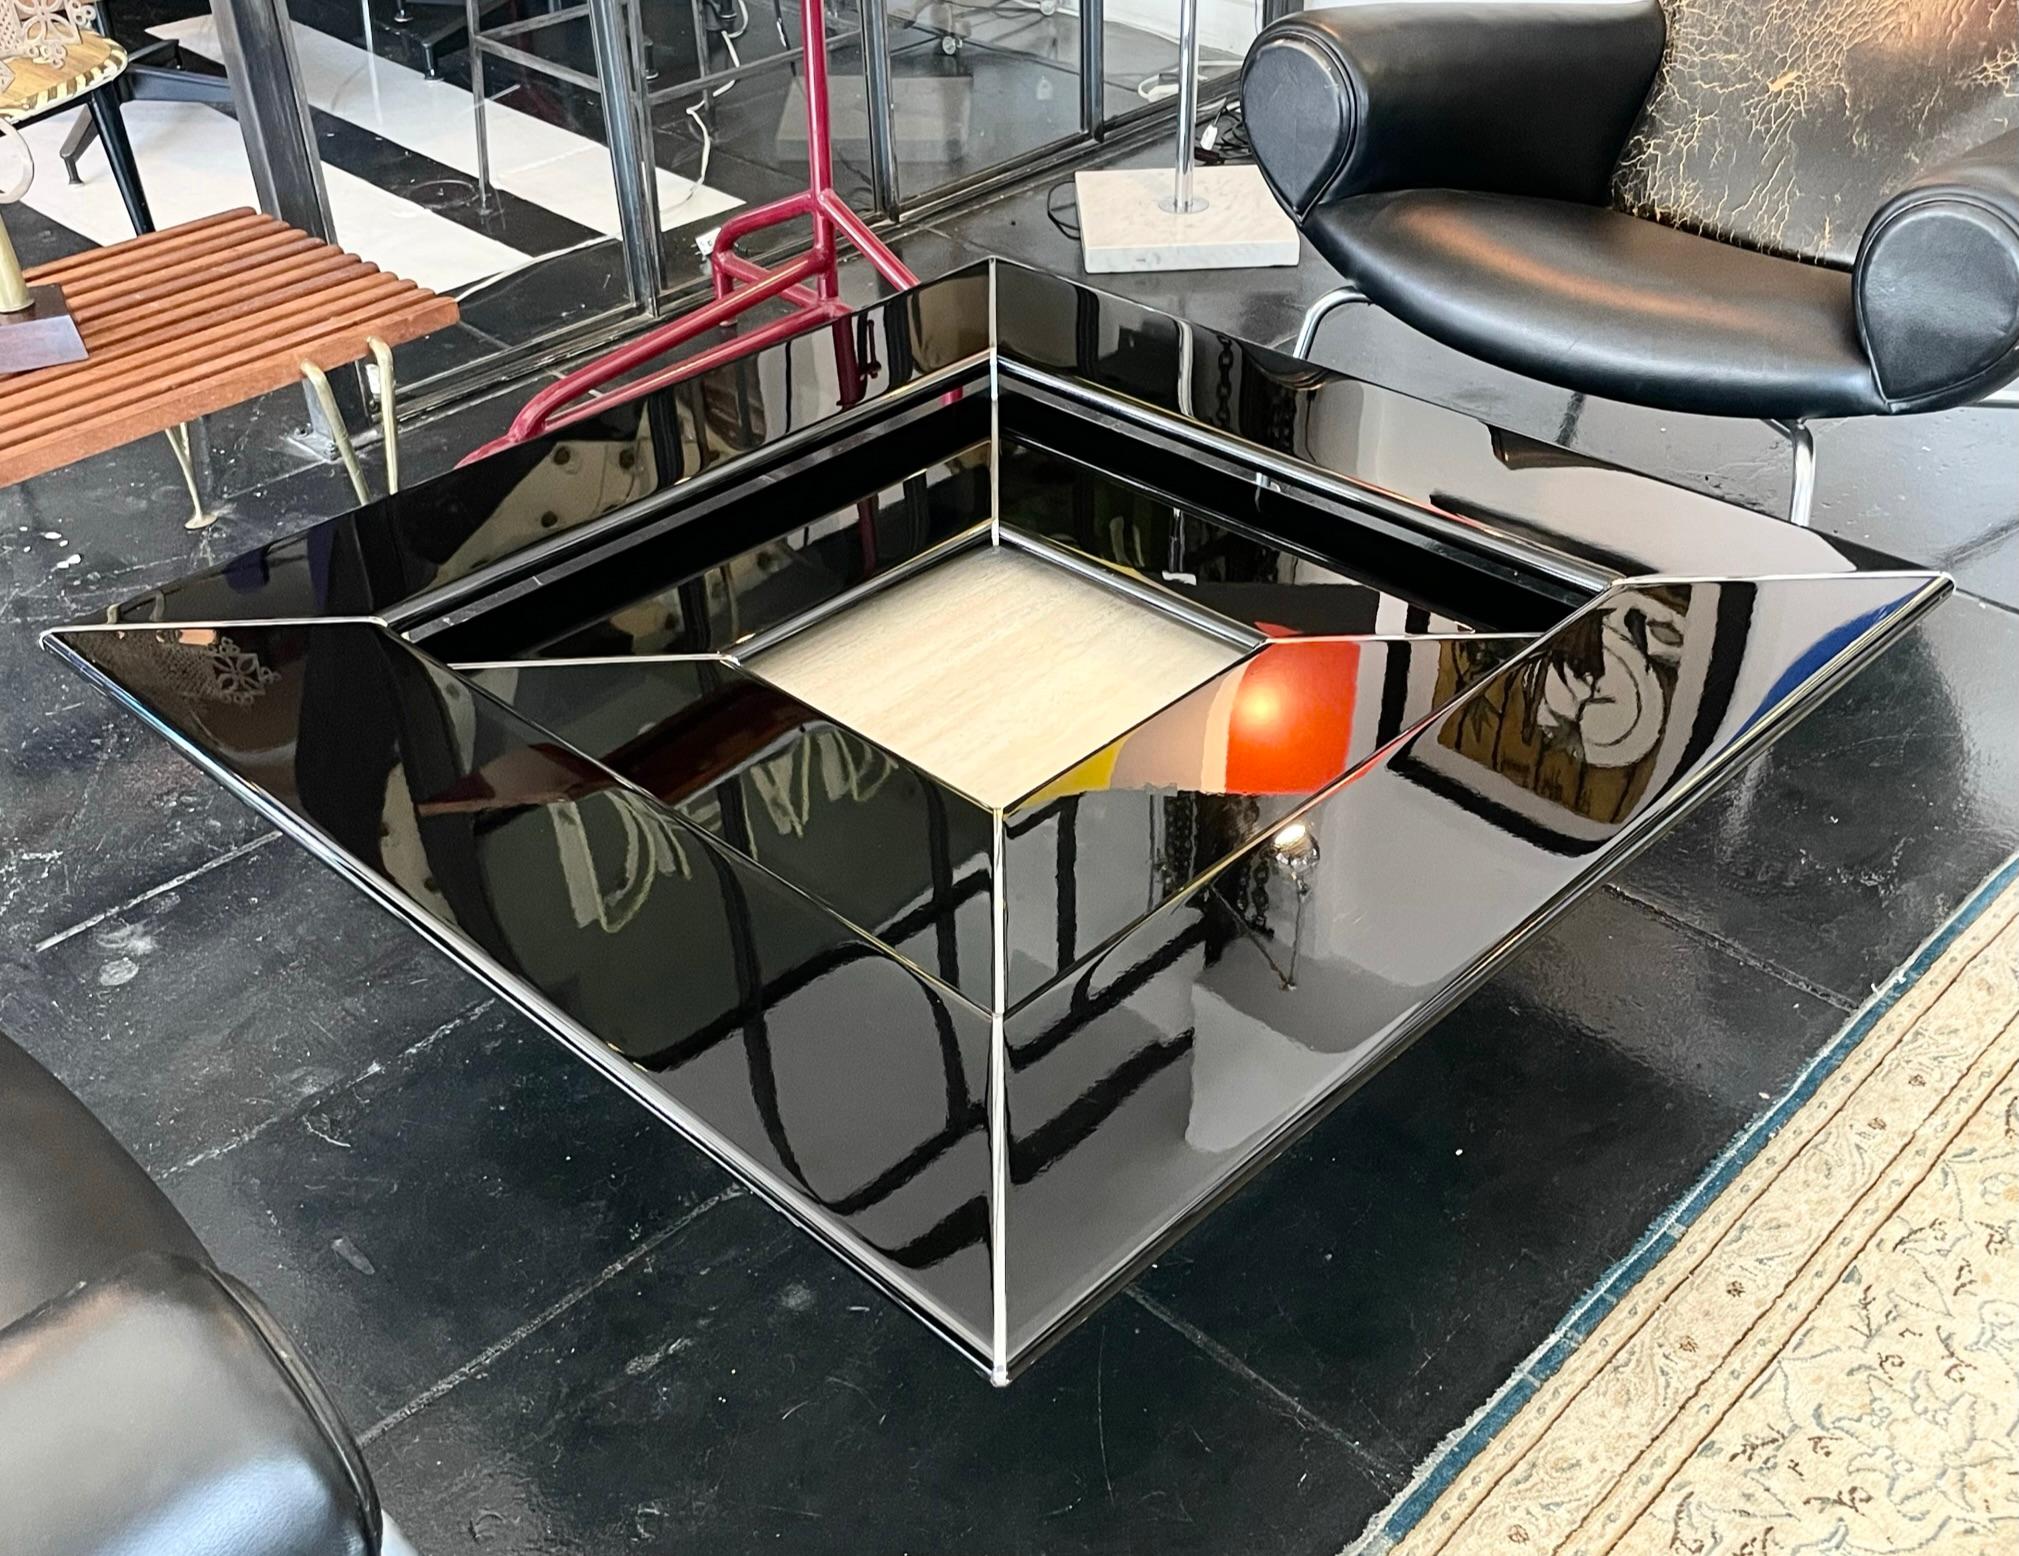 Beautiful 3-dimensional coffee table by Paolo Piva, 1970s. Black lacquer with silver trim, travertine base in great condition.